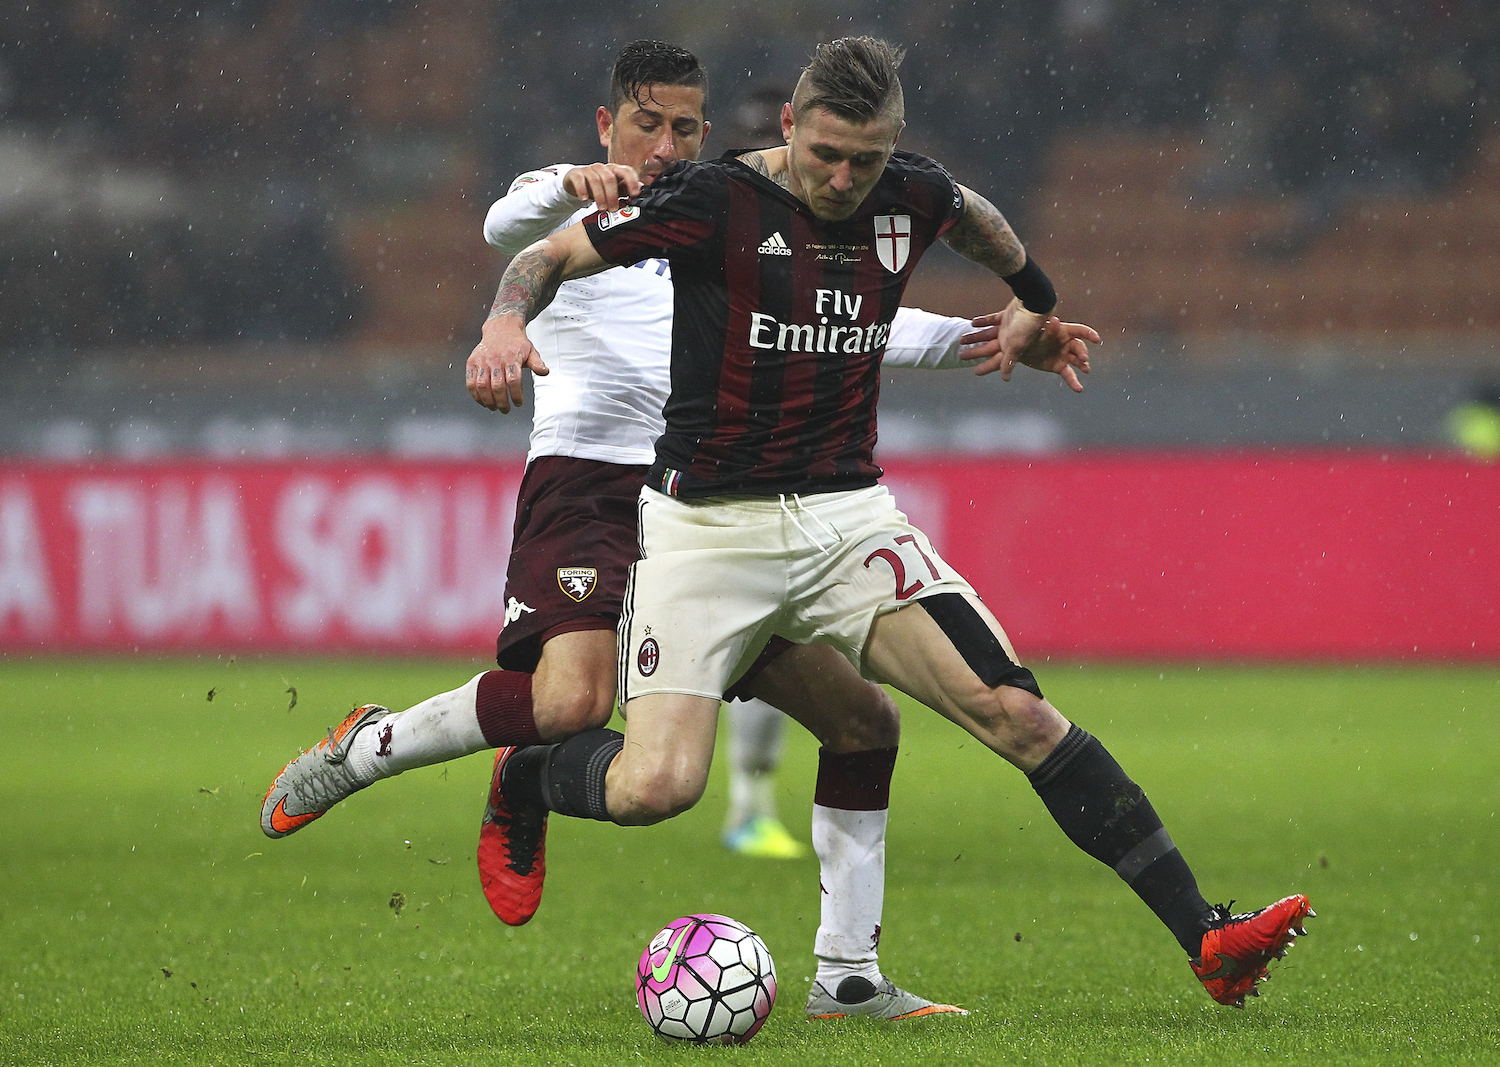 Kucka is pressured by Vives. | Marco Luzzani/Getty Images